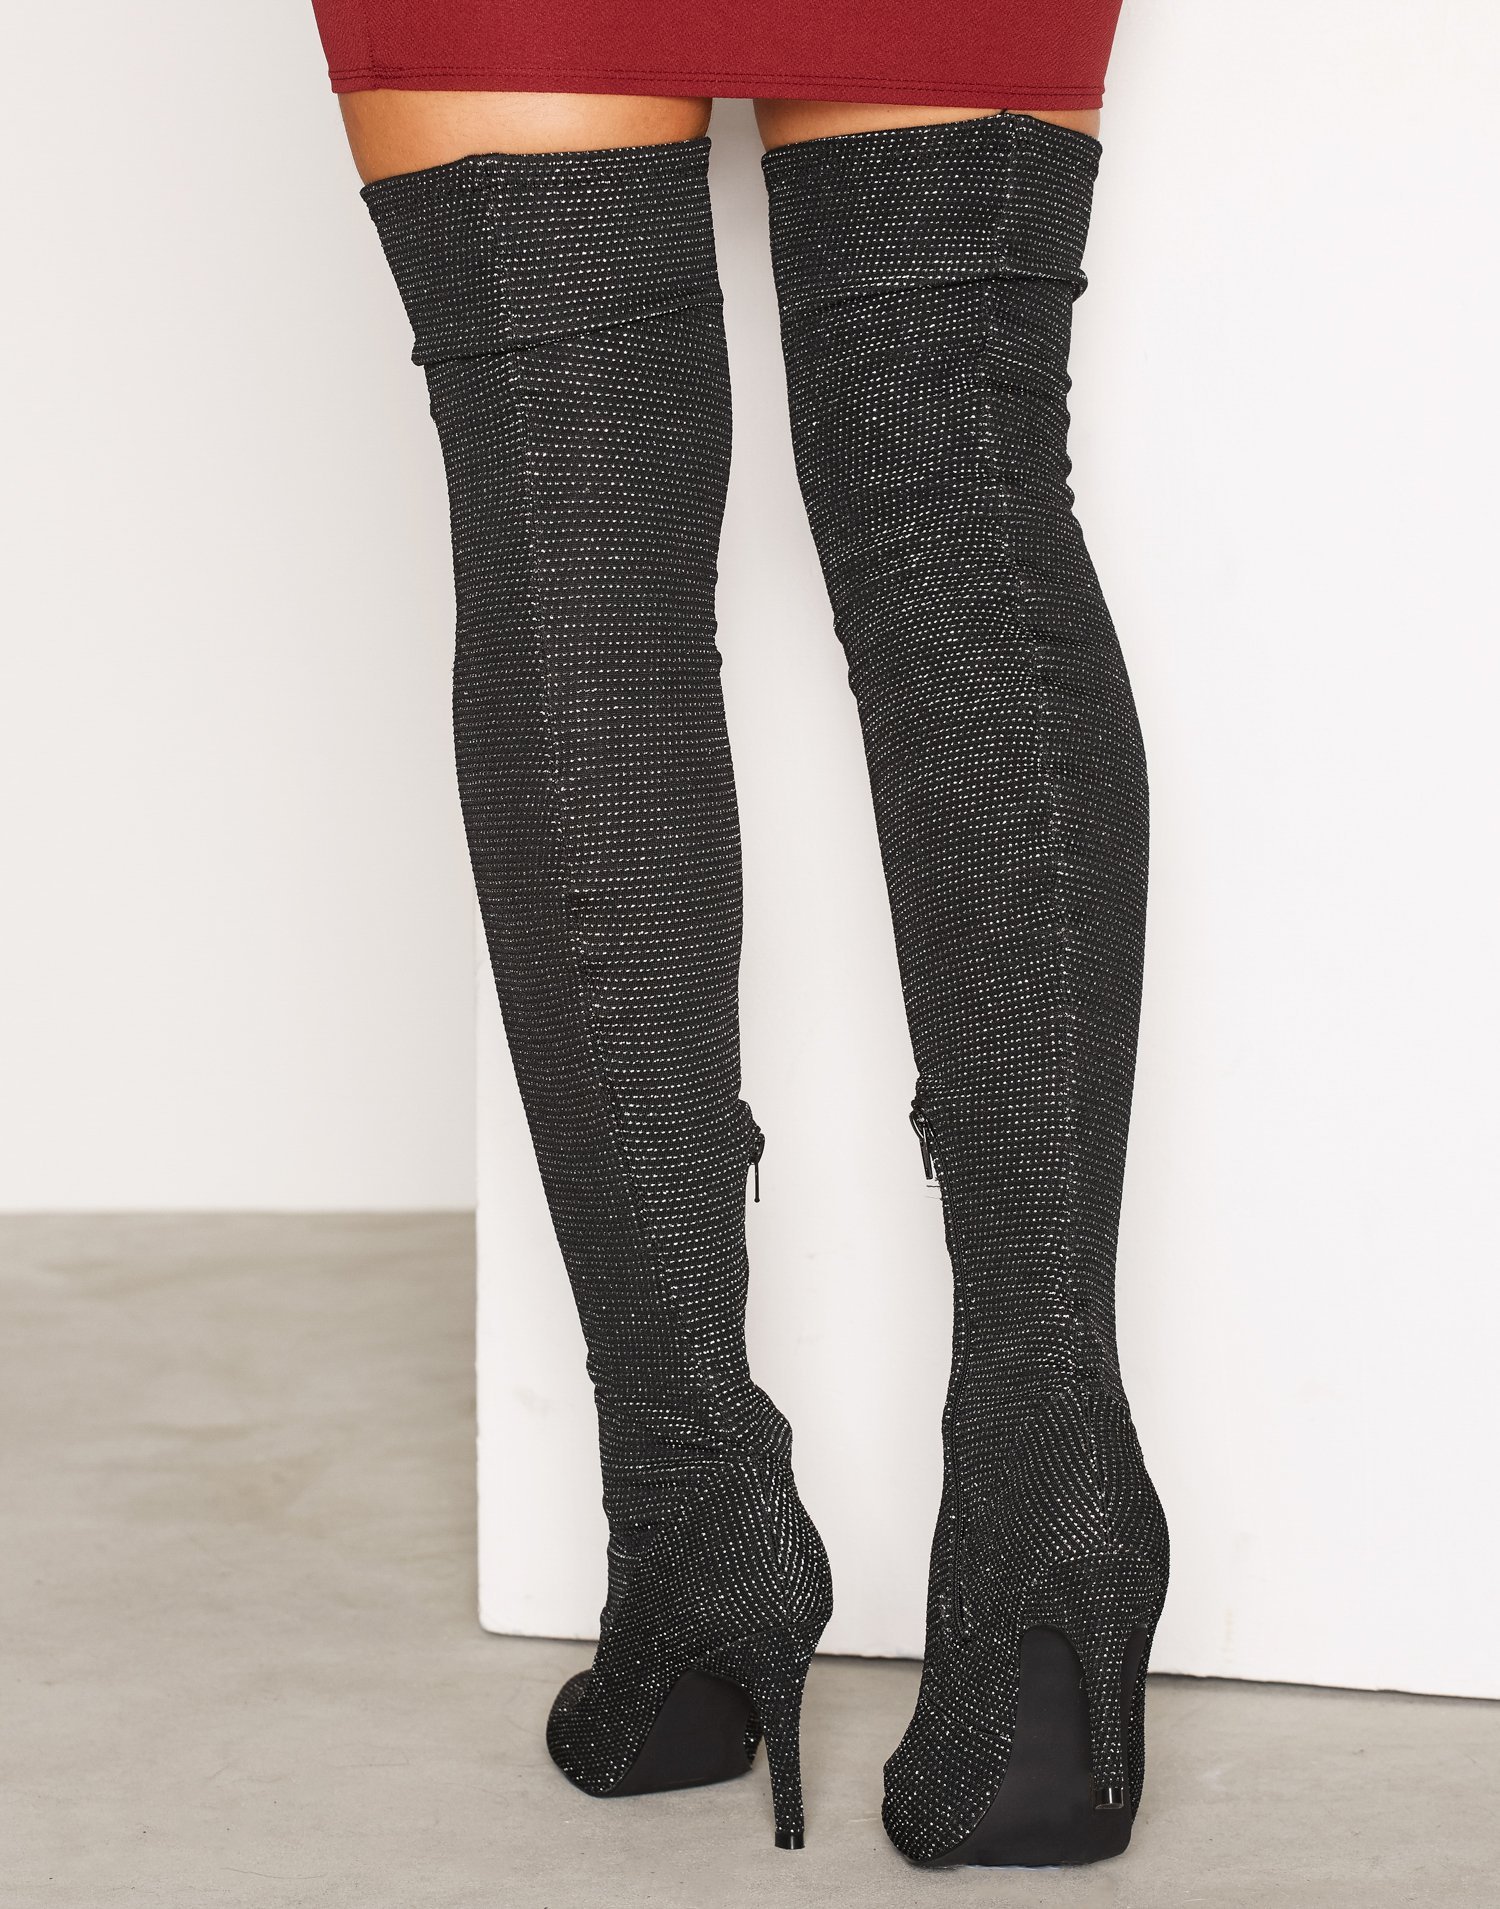 Thigh High Lurex Boot - Nly Shoes - Black - Boots - Shoes - Women ...